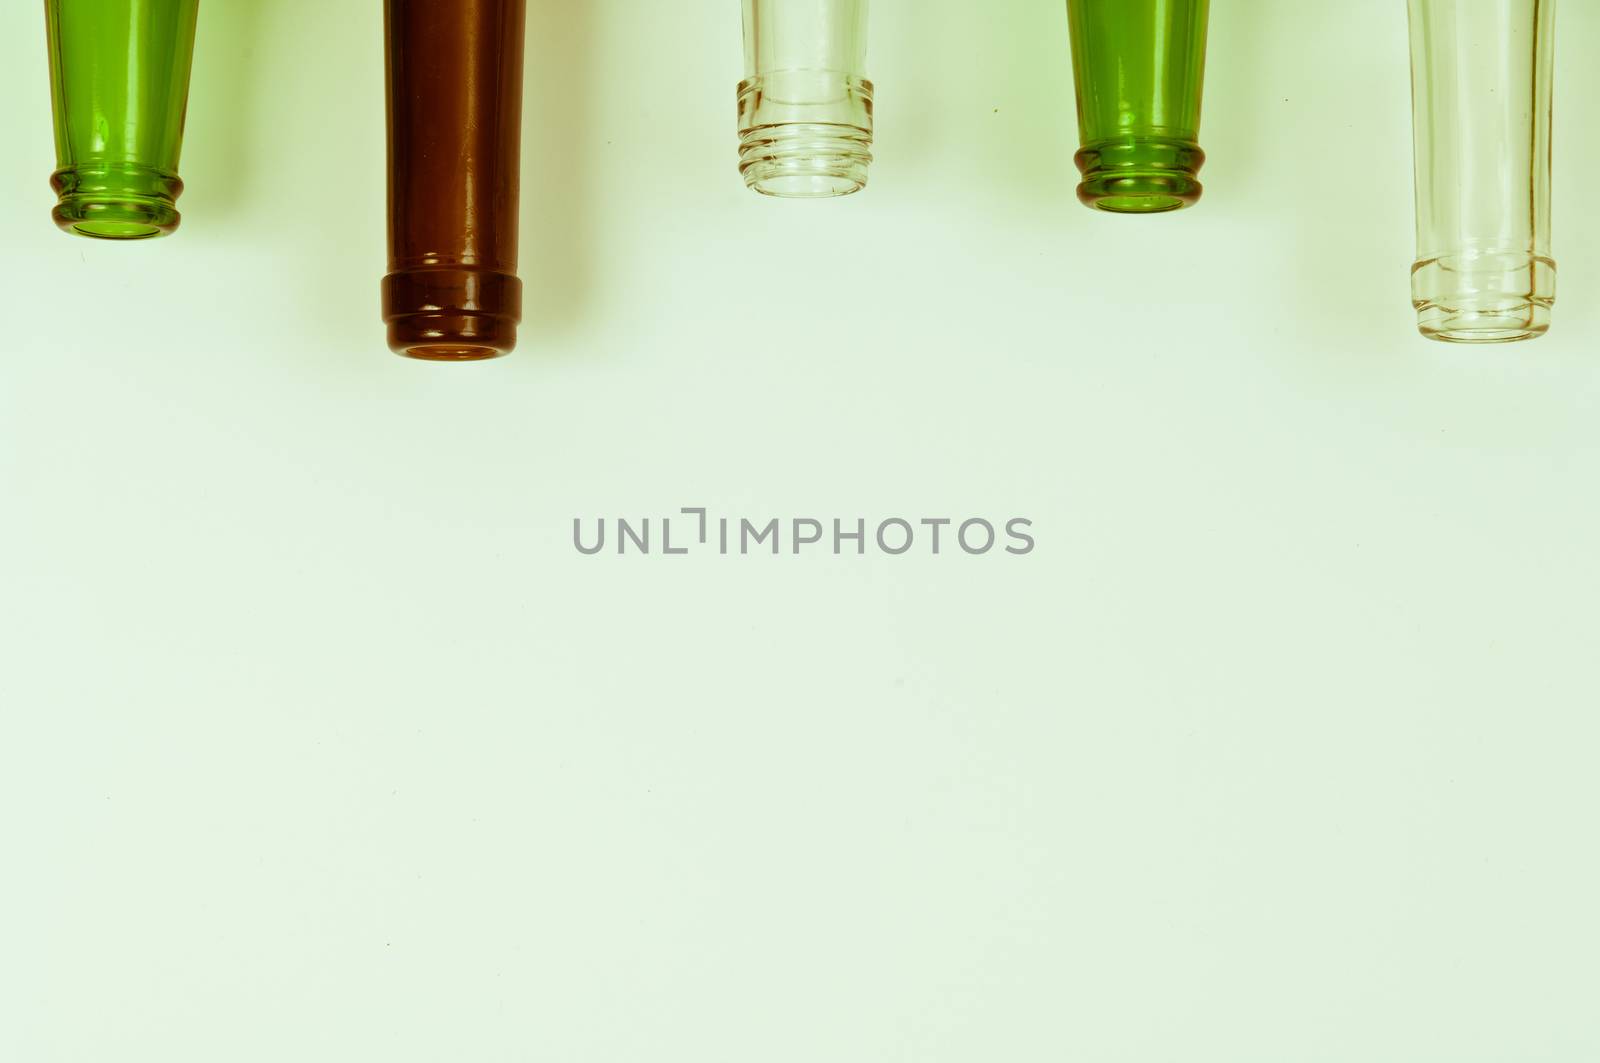 Empty glass bottles of mixed colors including green, clear white, brown